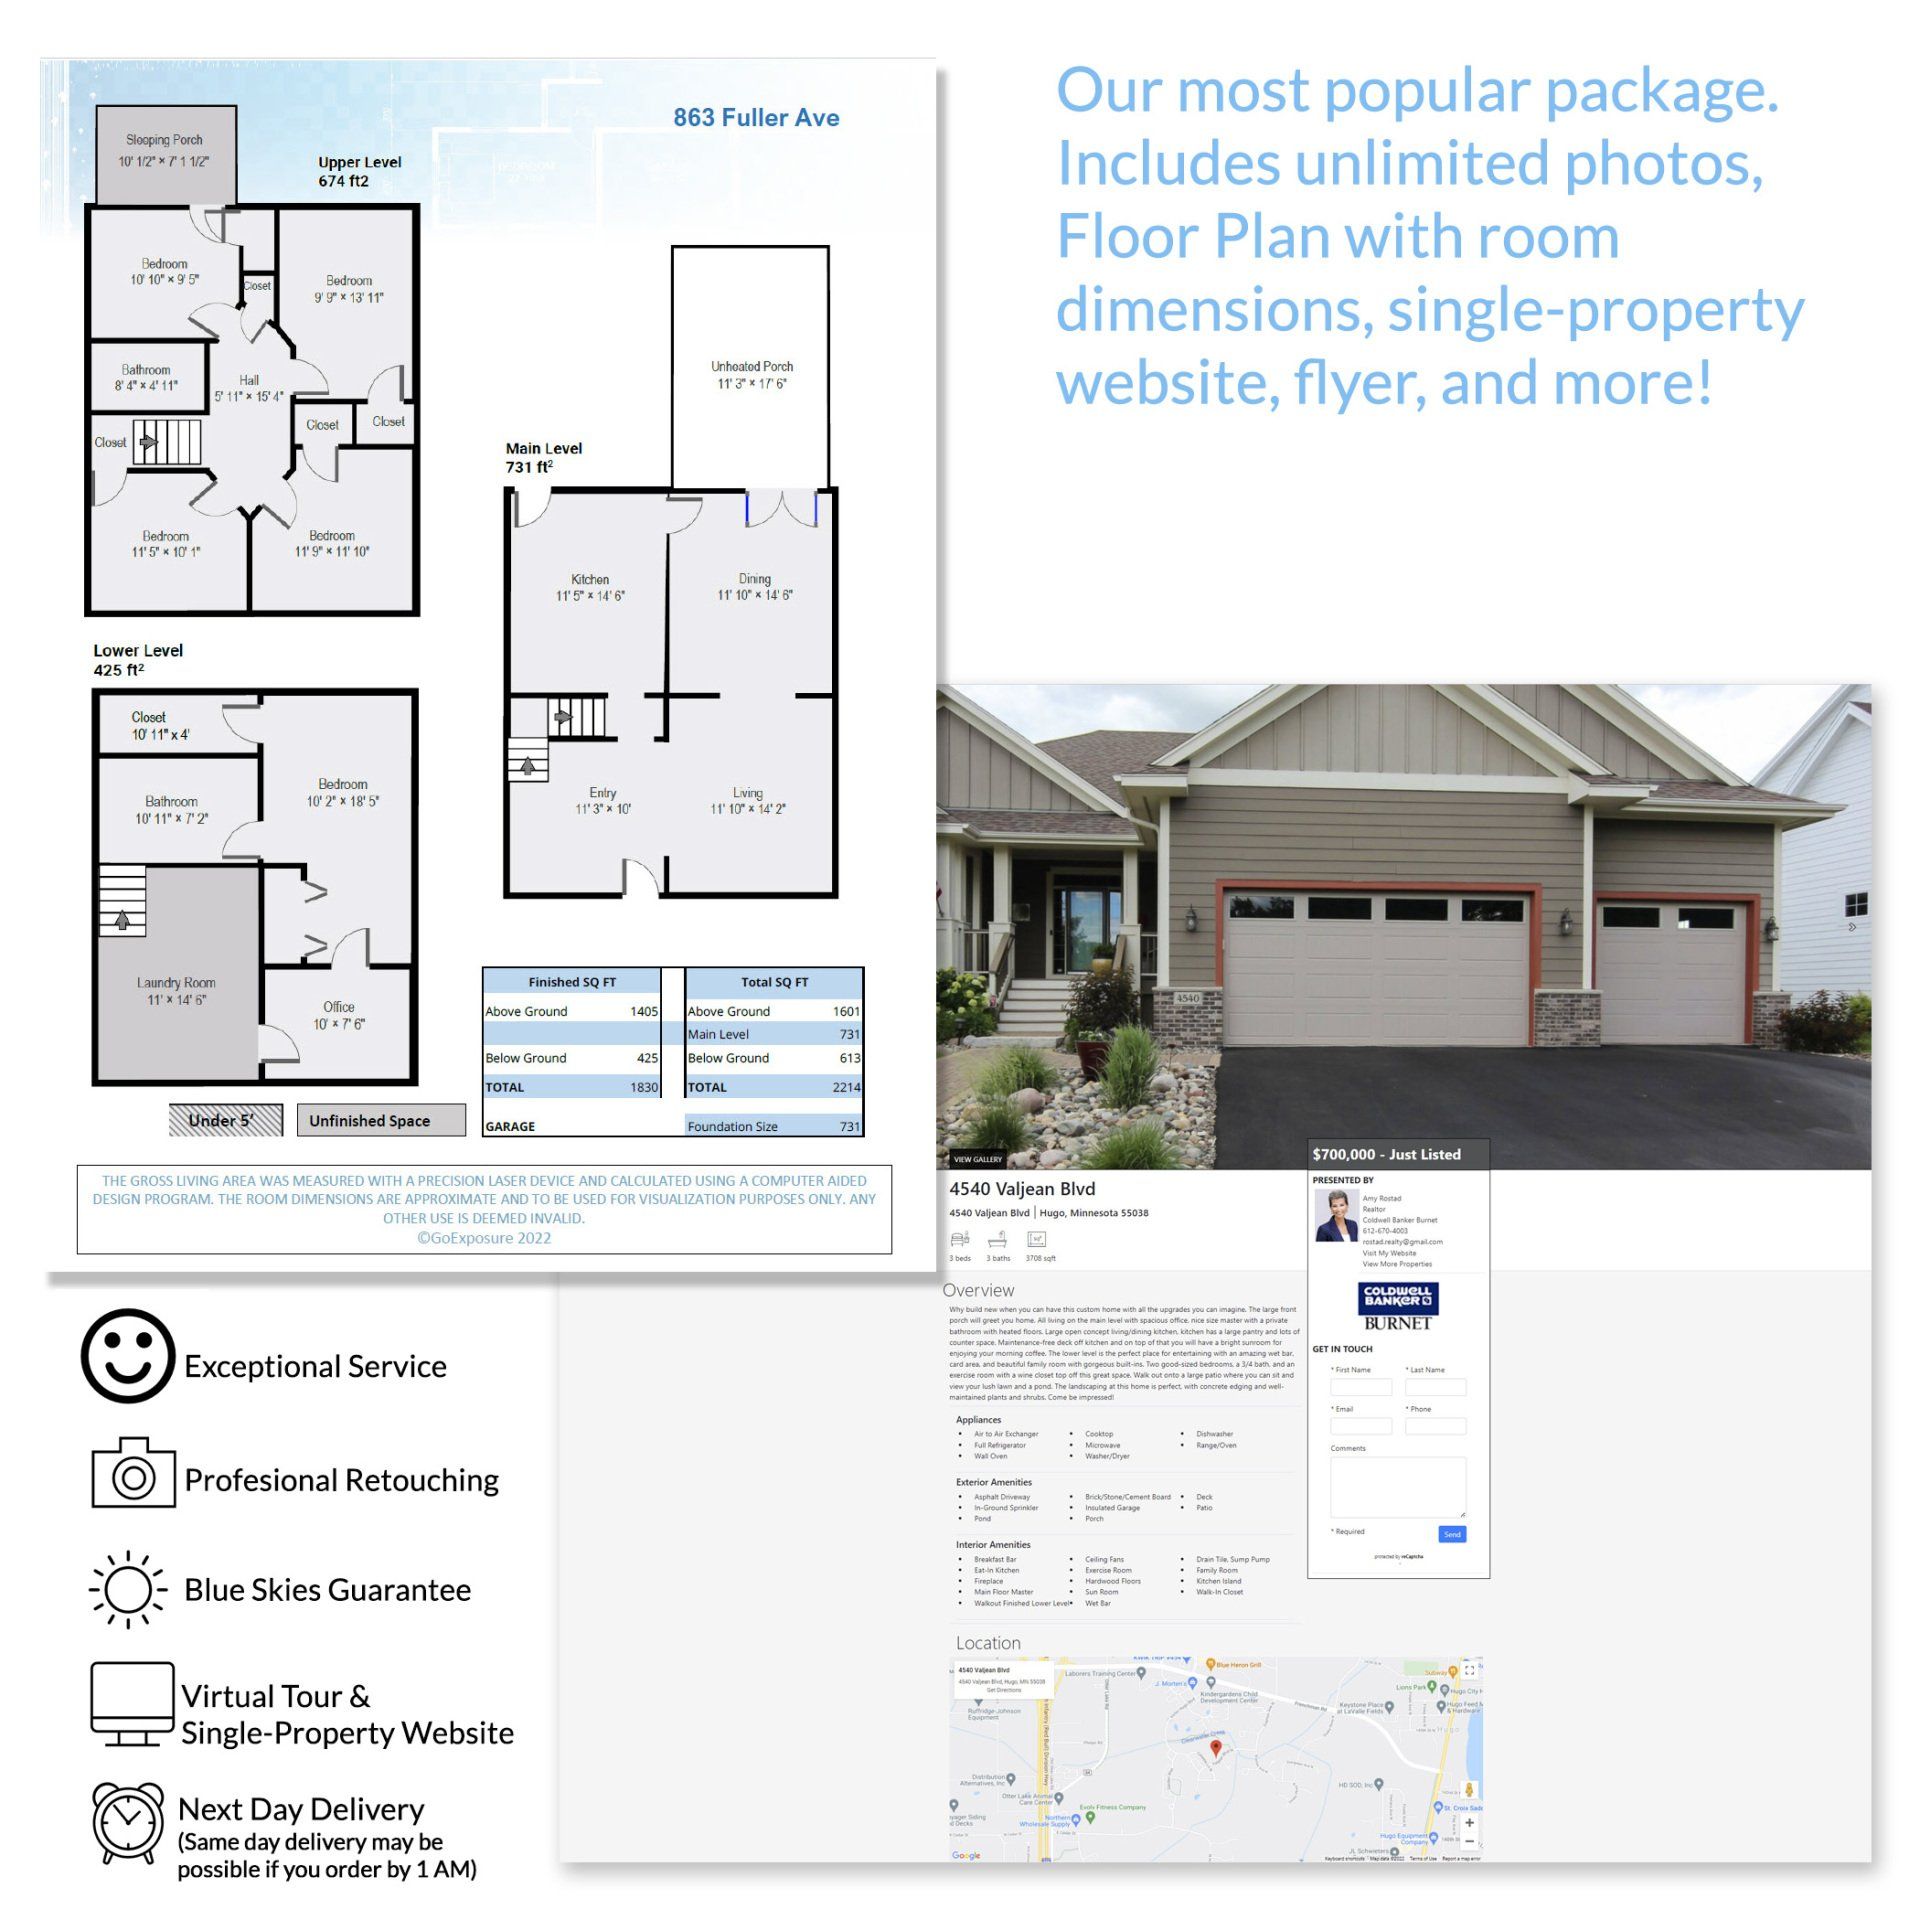 Photo and Floor Plan Packages